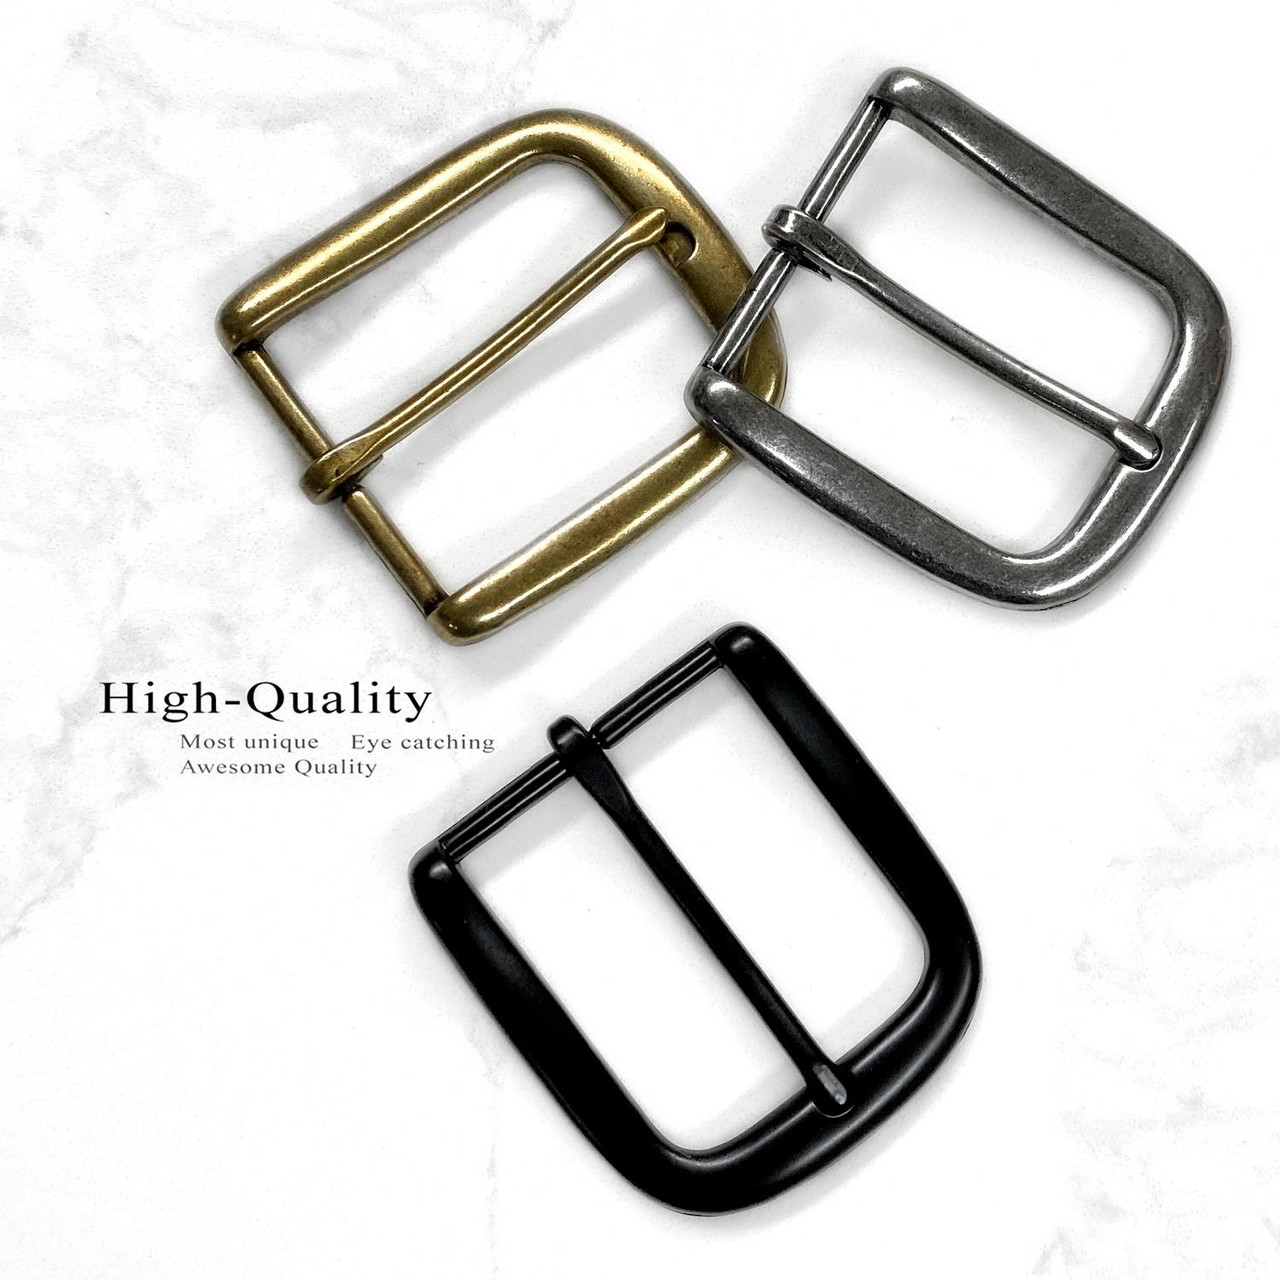 Replacement Roller Buckle Classic Casual Metal Belt Buckle fits 1-1/2  (38mm) Belt